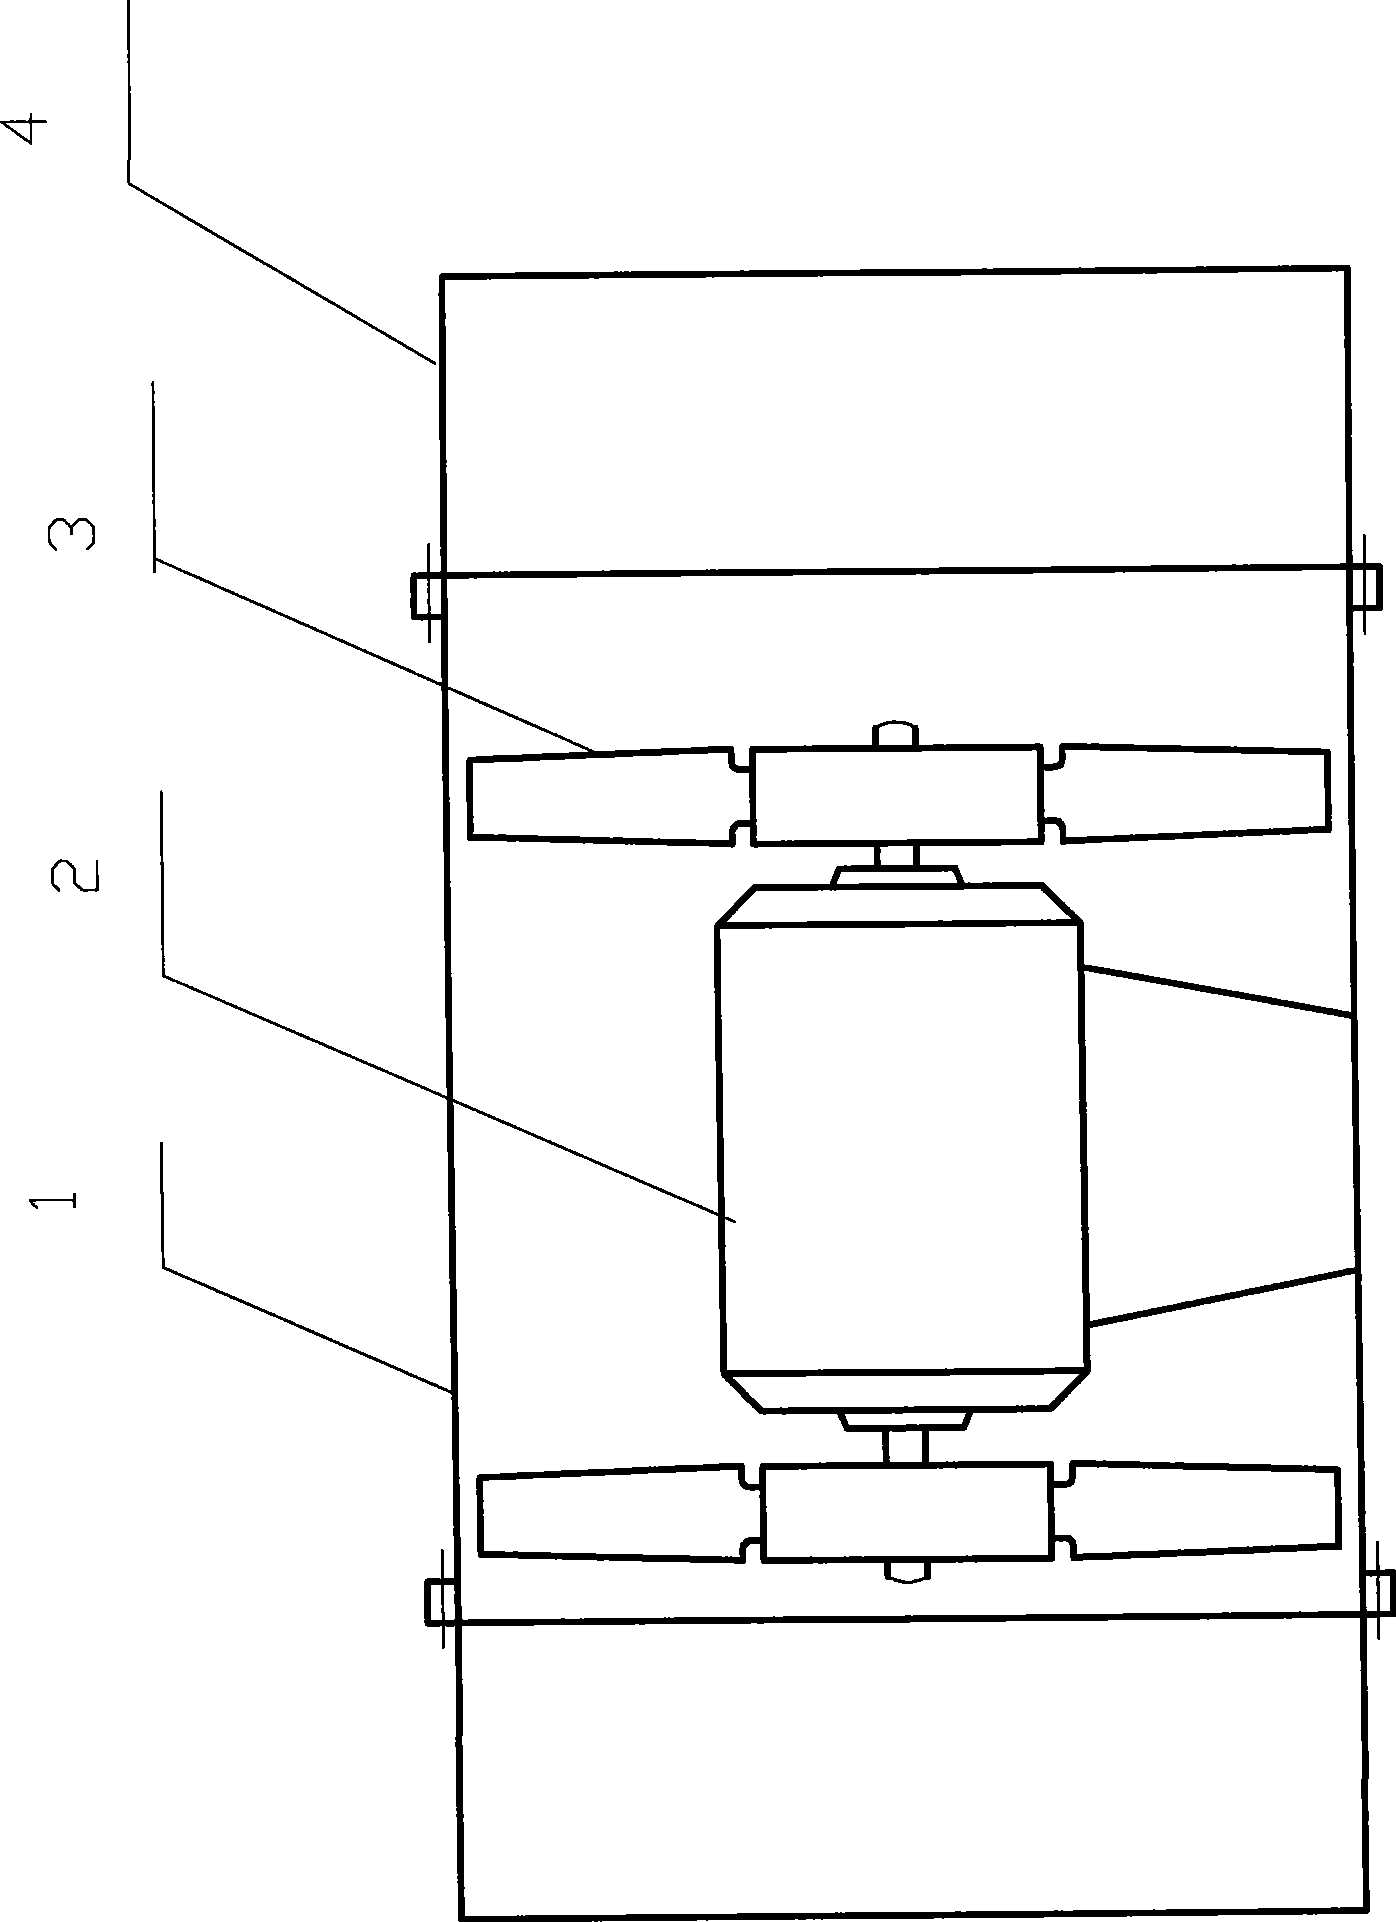 Double impeller ventilating apparatus with rubber pipe wind pipe